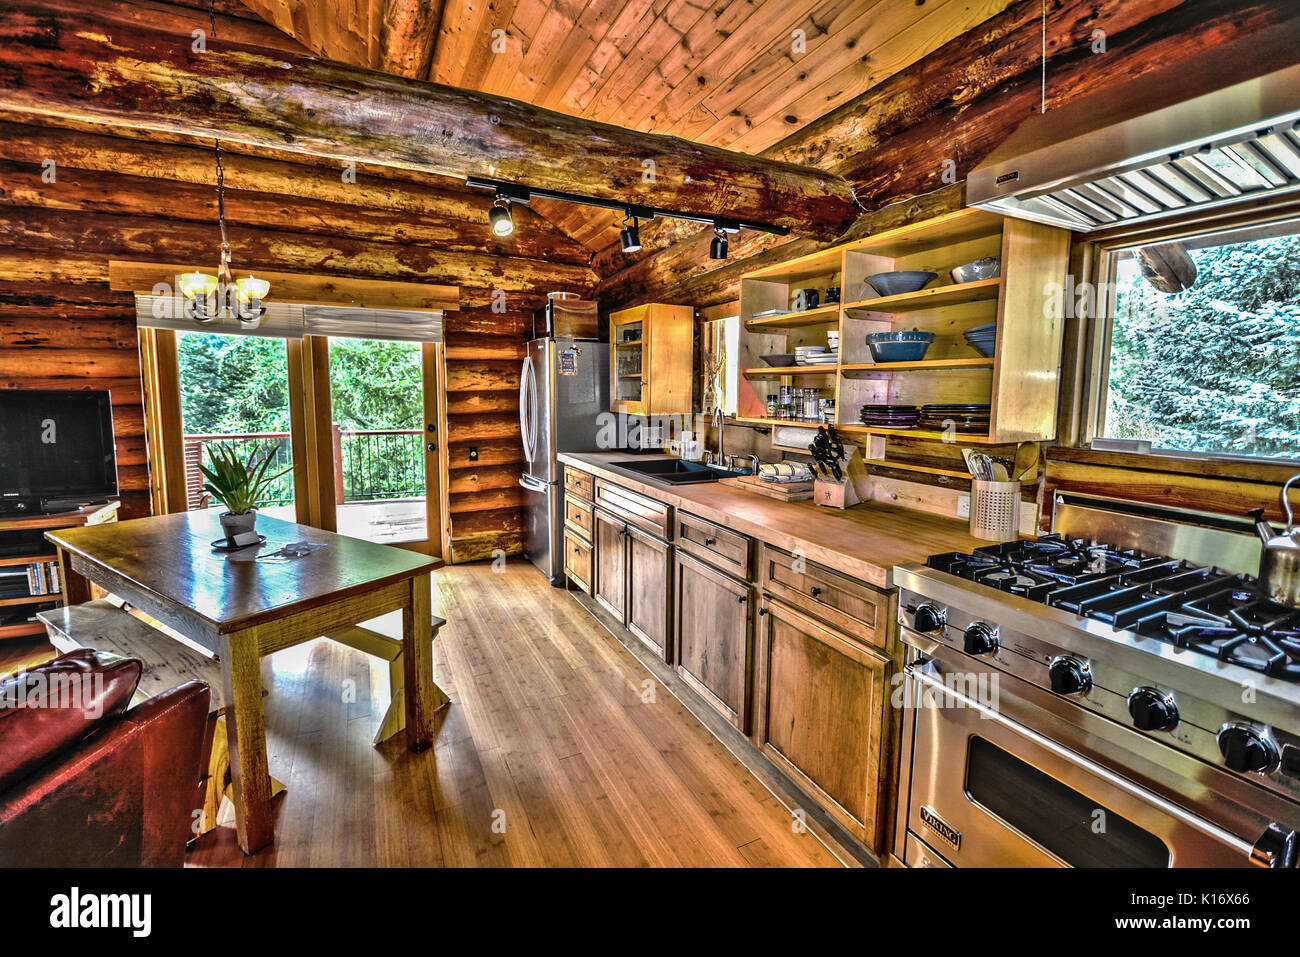 Kitchen of a log home in the mountains with stainless appliances and hardwood floors Stock Photo